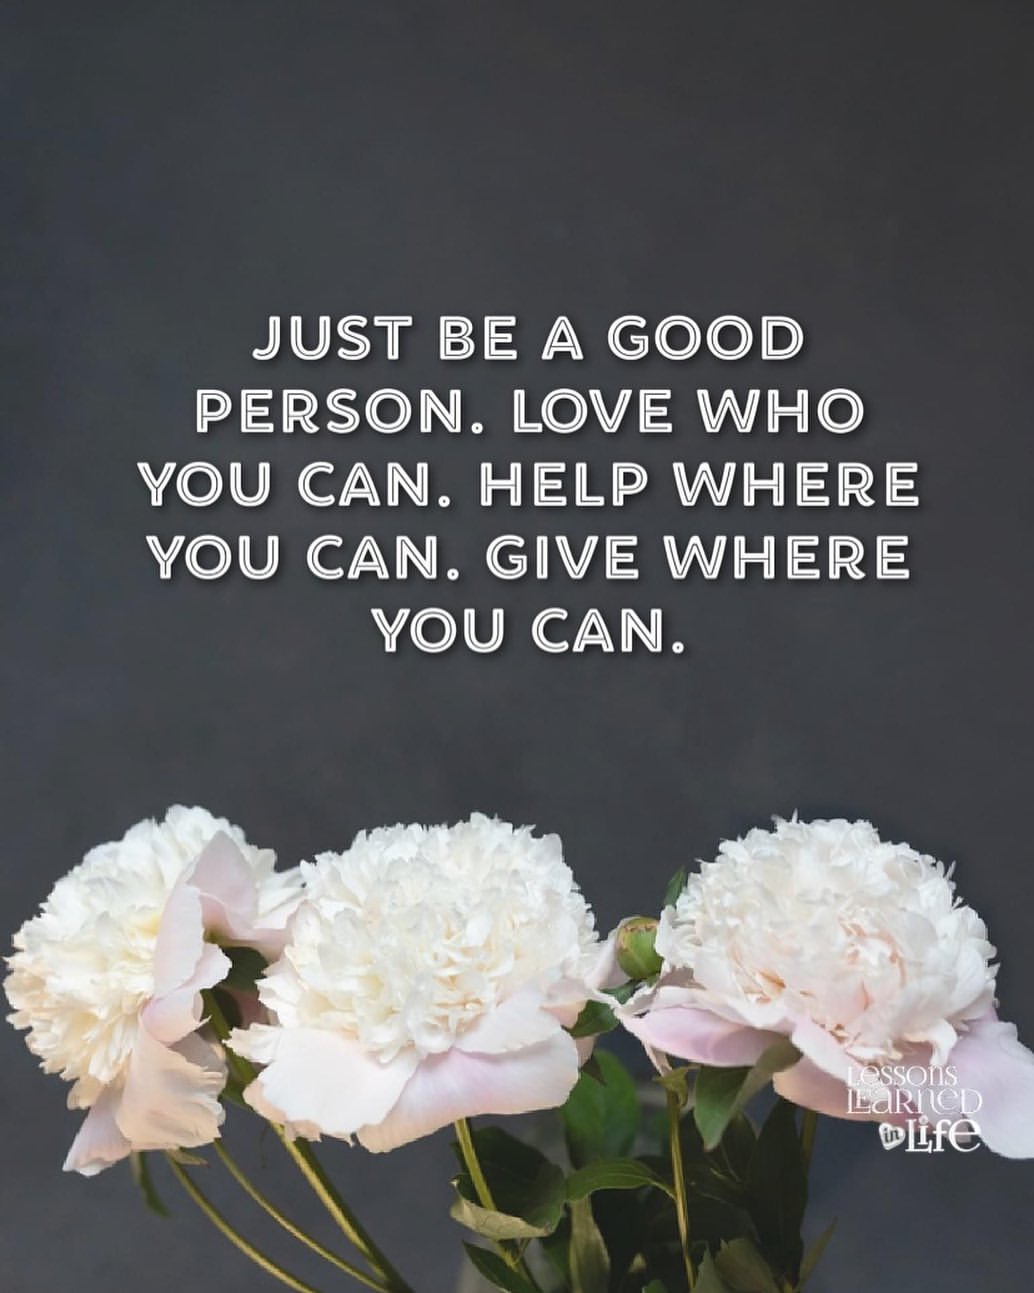 Just be a good person. Love who you can. Help where you can. Give where you can.